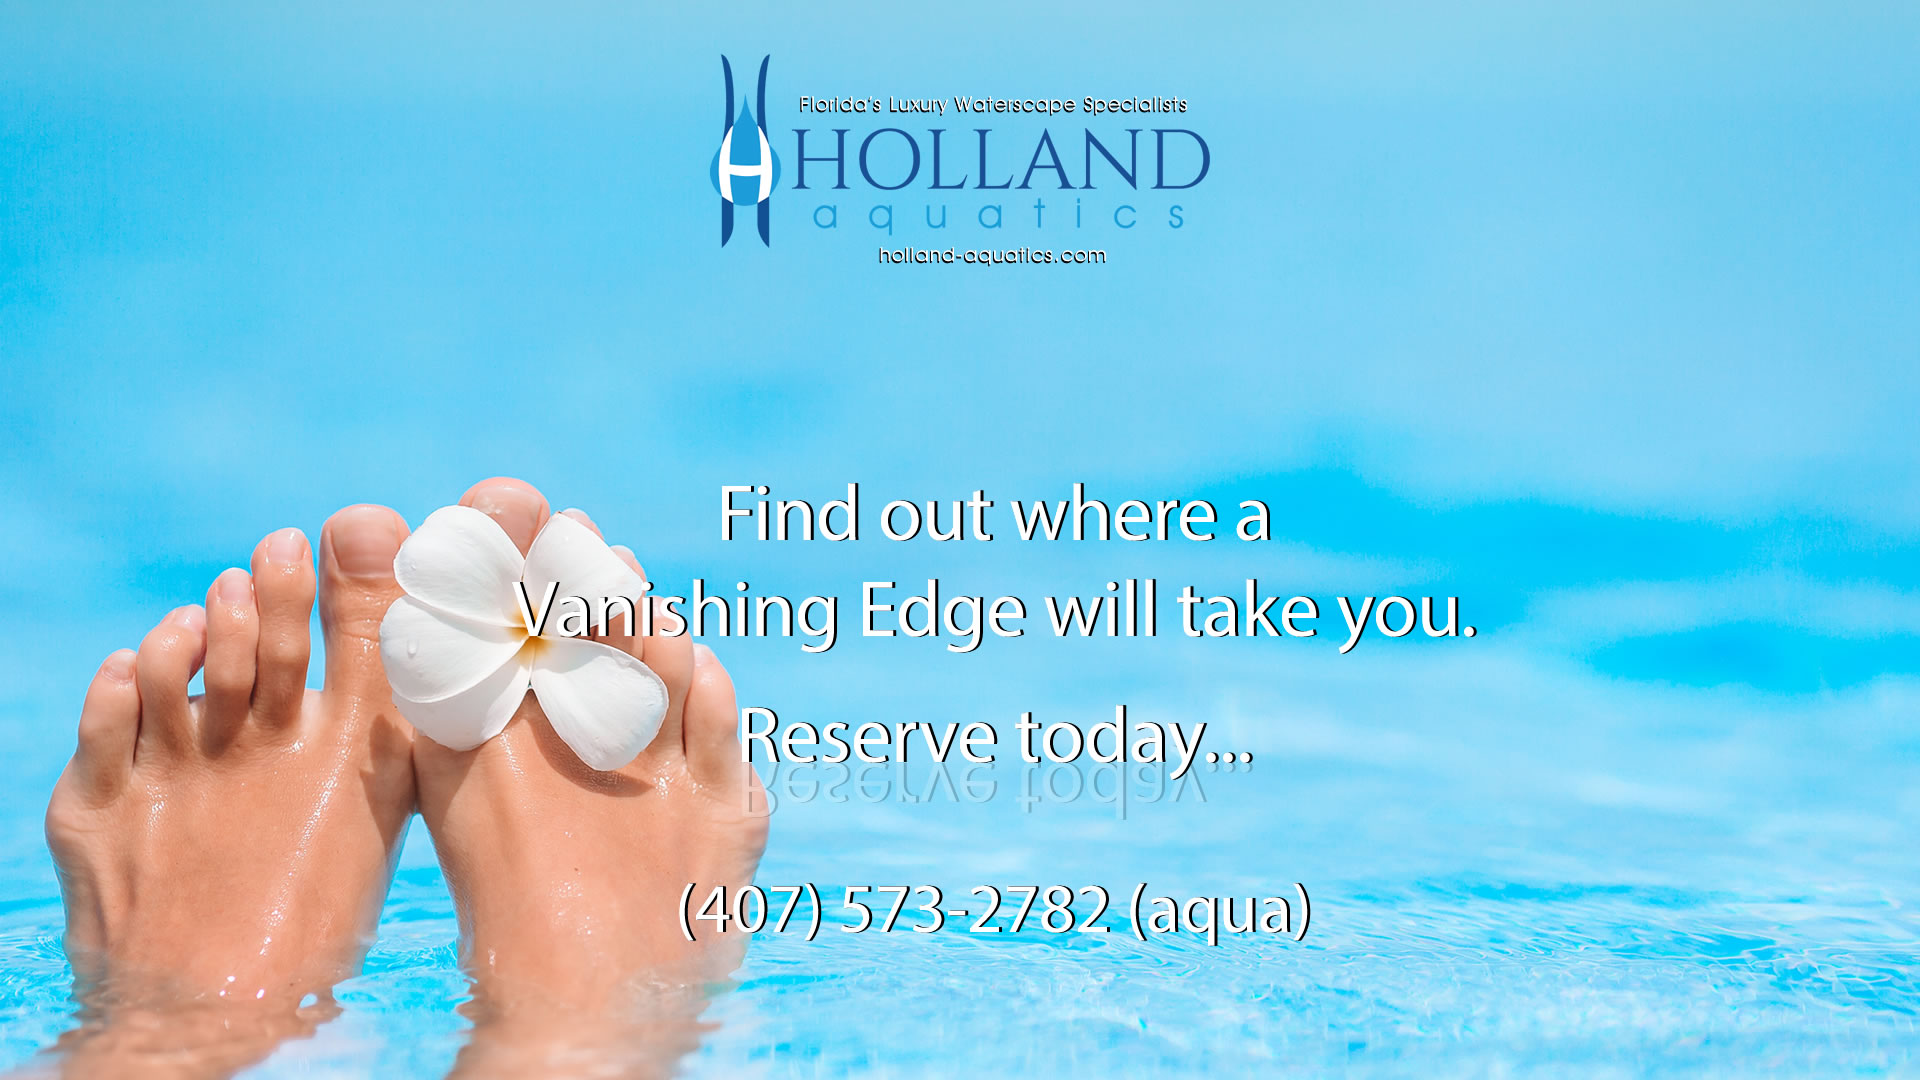 Find out where a Vanishing Edge will take you. Reserve your Holland Aquatics Design Build today.